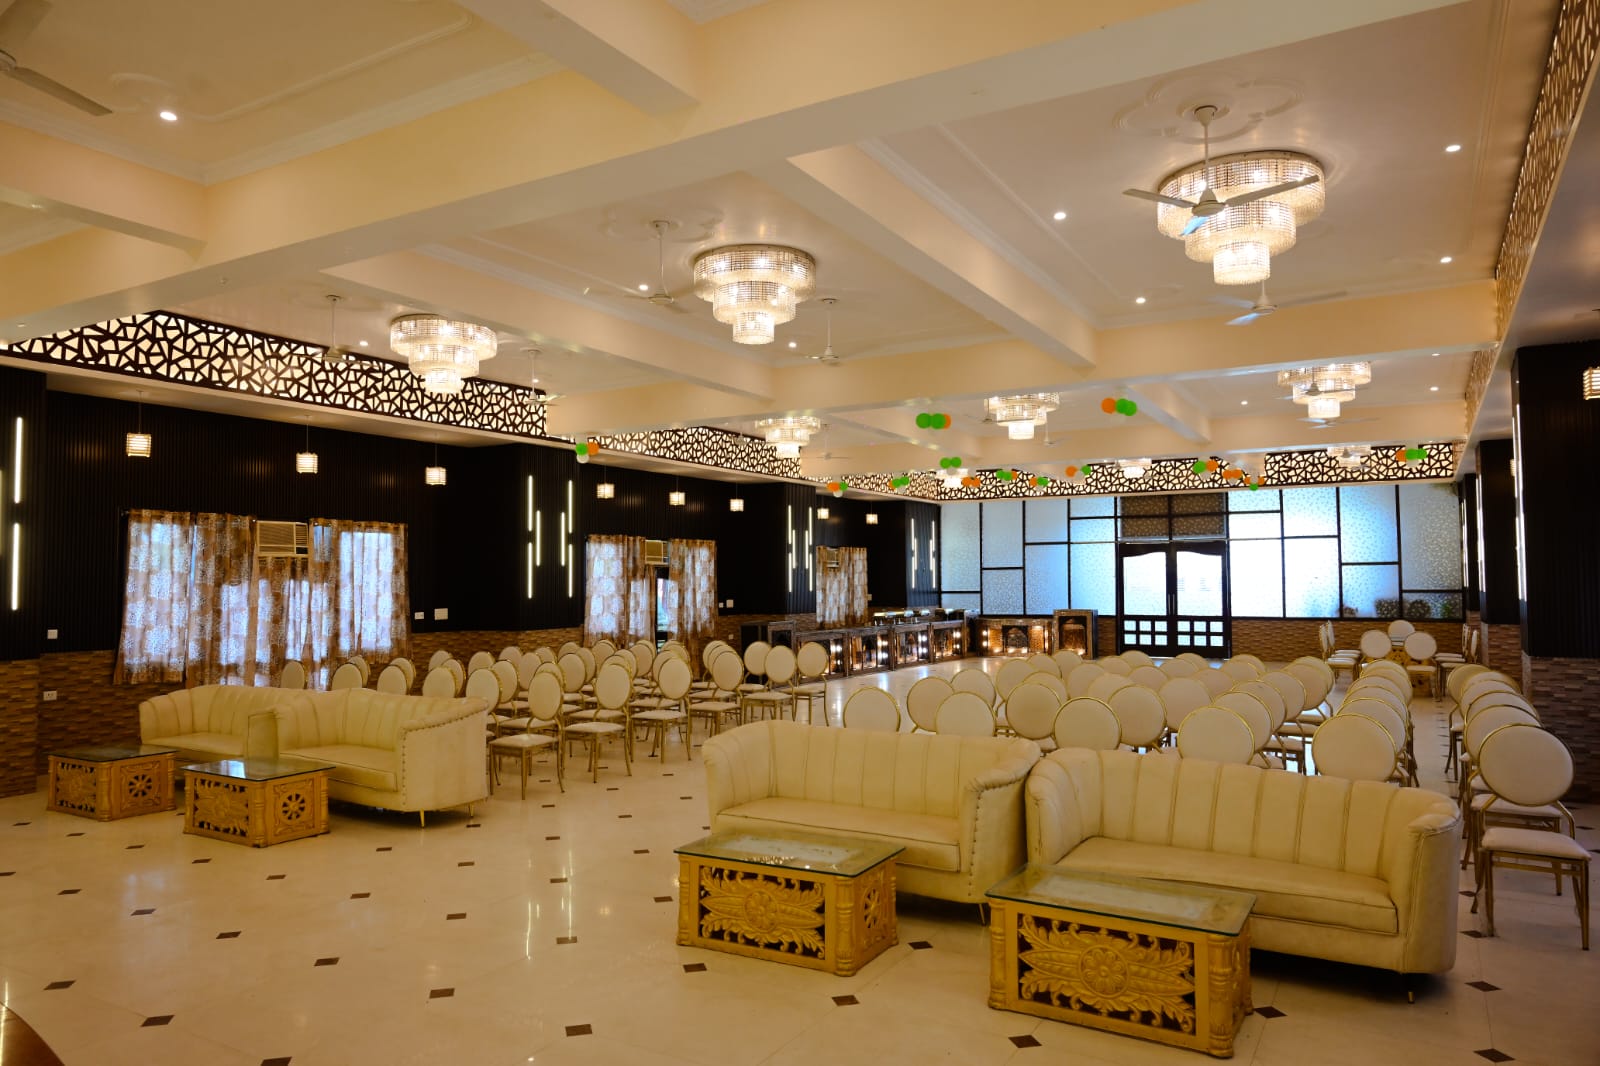 Marriage Banquet in Faizabad, Hotel in Faizabad | Best Hotel in Faizabad, Ayodhya | Marriage Lawn in Faizabad | Wedding Banquet in faizabad | Taraji Resort Hotel and Restaurant